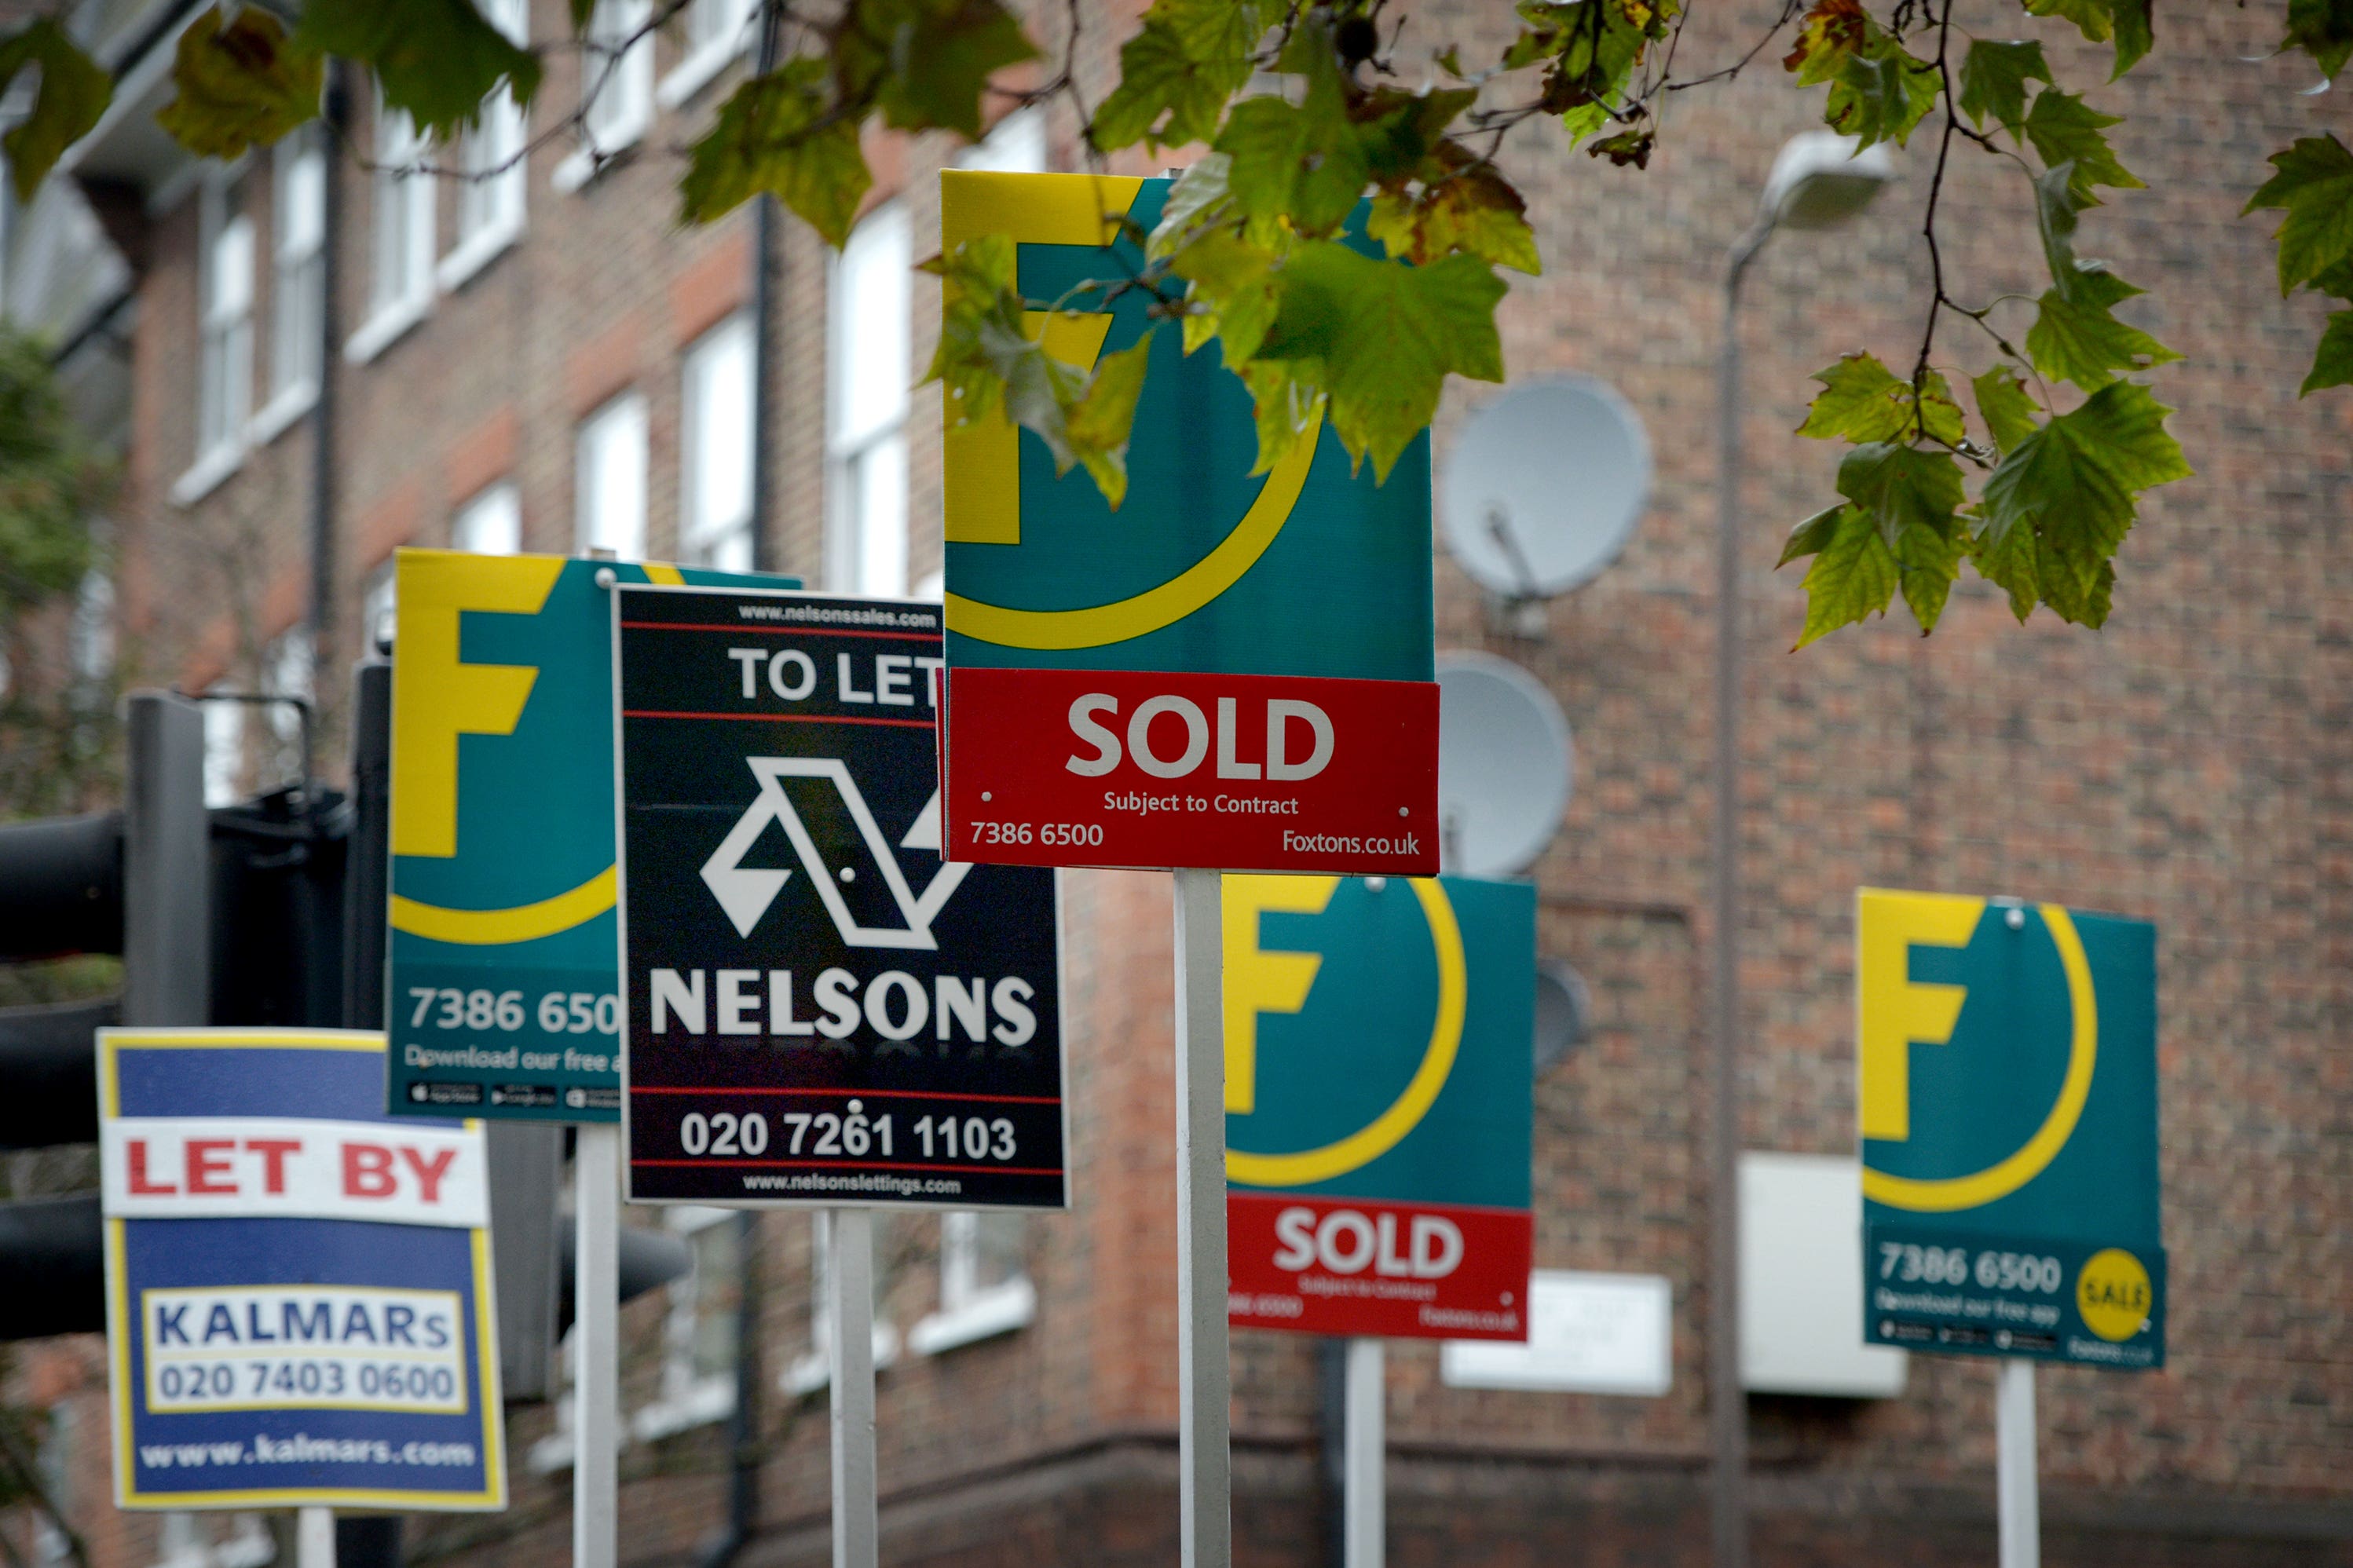 Rent has reached record levels across the UK